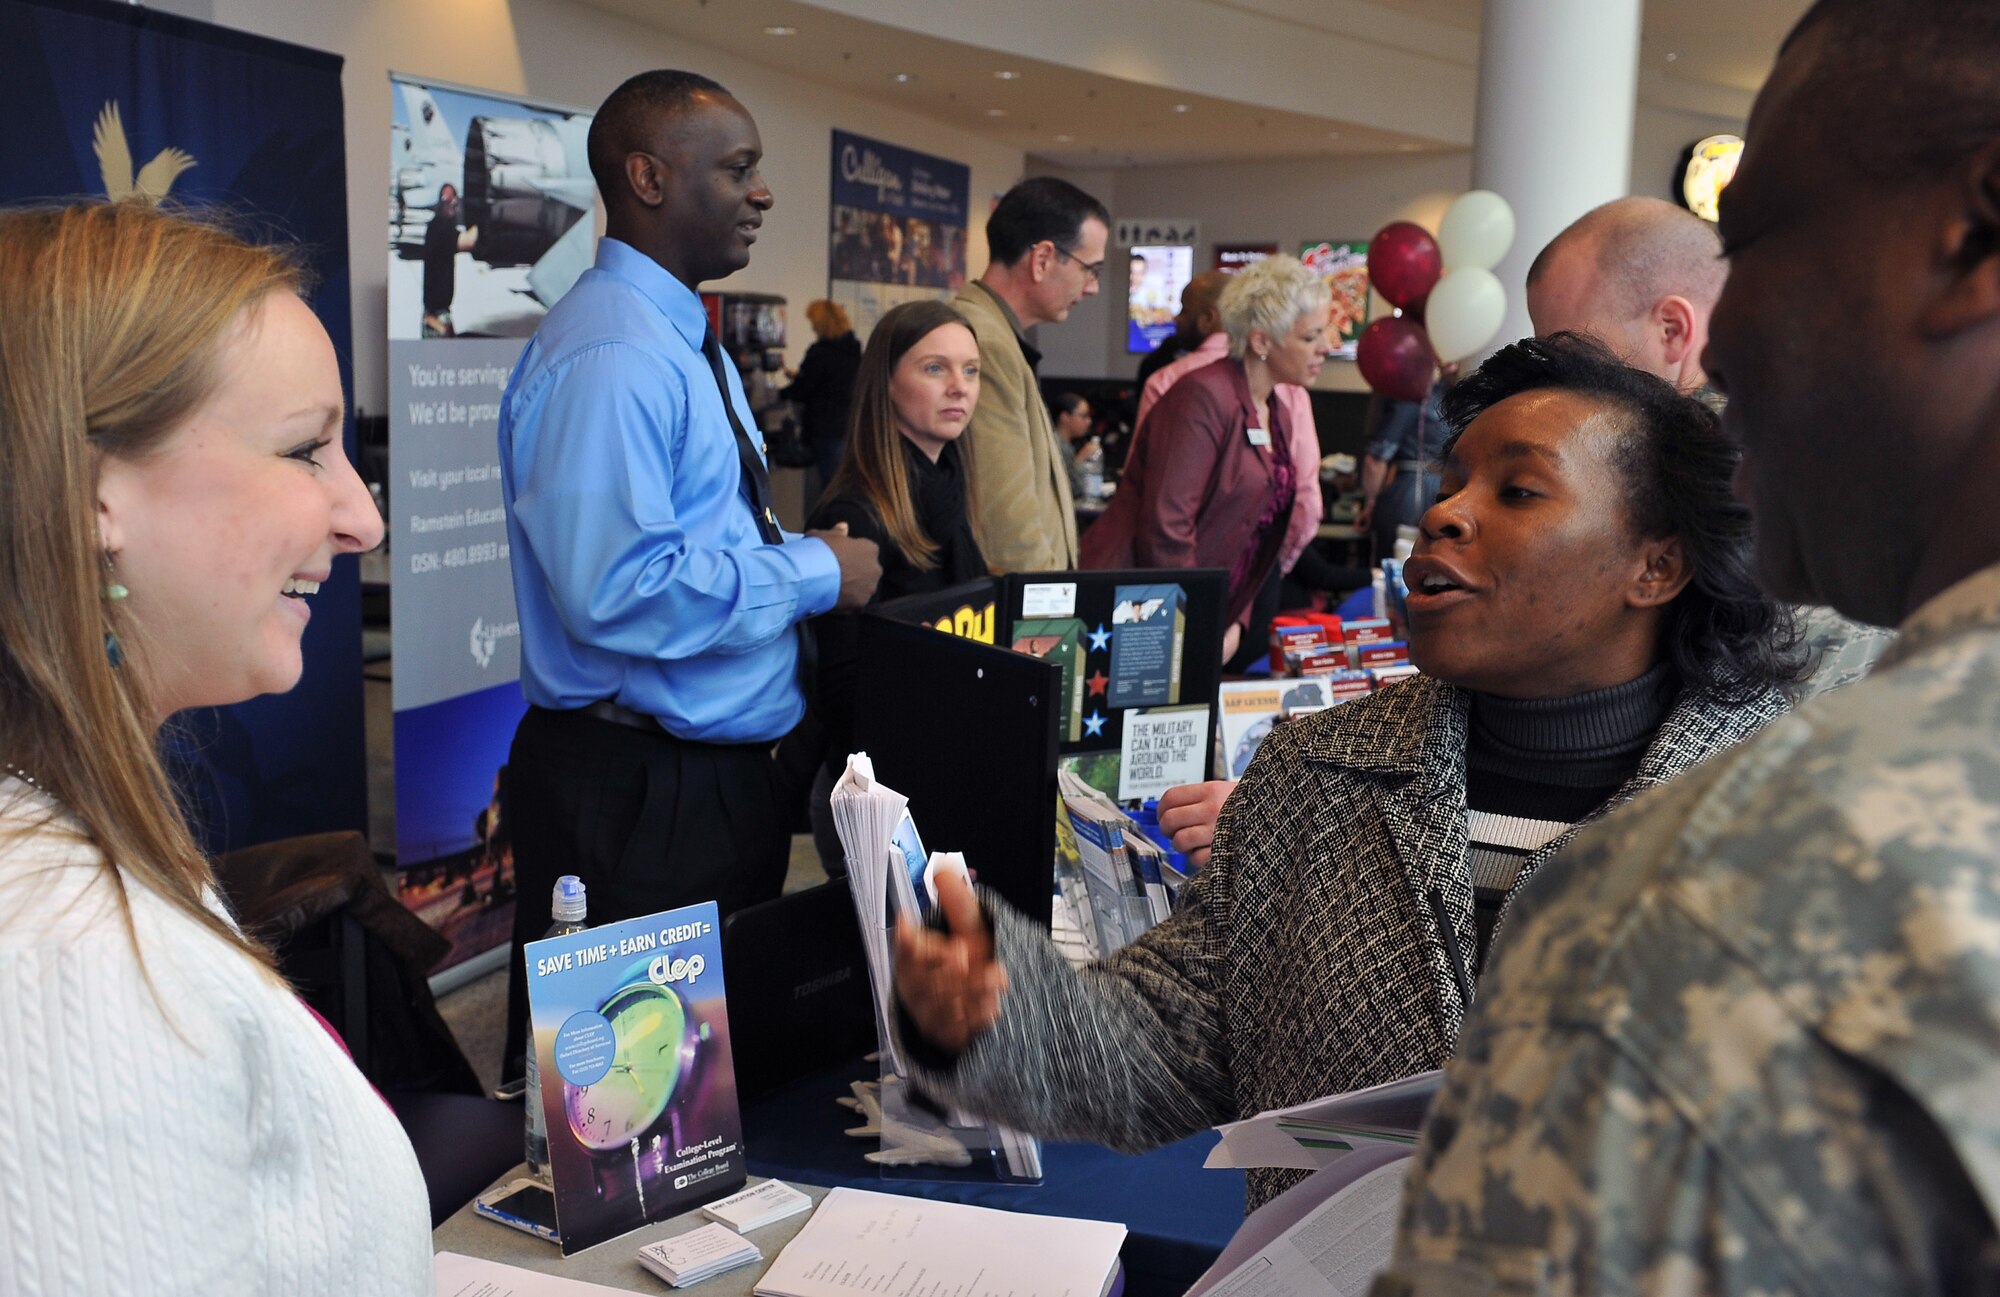 U.S. Army Staff Sgt. Lana Edwards, NCOIC of quality management, consults with individuals working the education fair to better educate herself on future opportunities on Ramstein Air Base, Germany, Jan. 31, 2013. The education office hosted the education fair at the Kaiserslautern Military Community Center to inspire people to get started on their education or to further pursue a degree. (U.S. Air Force photo/Airman 1st Class Dymekre Allen)